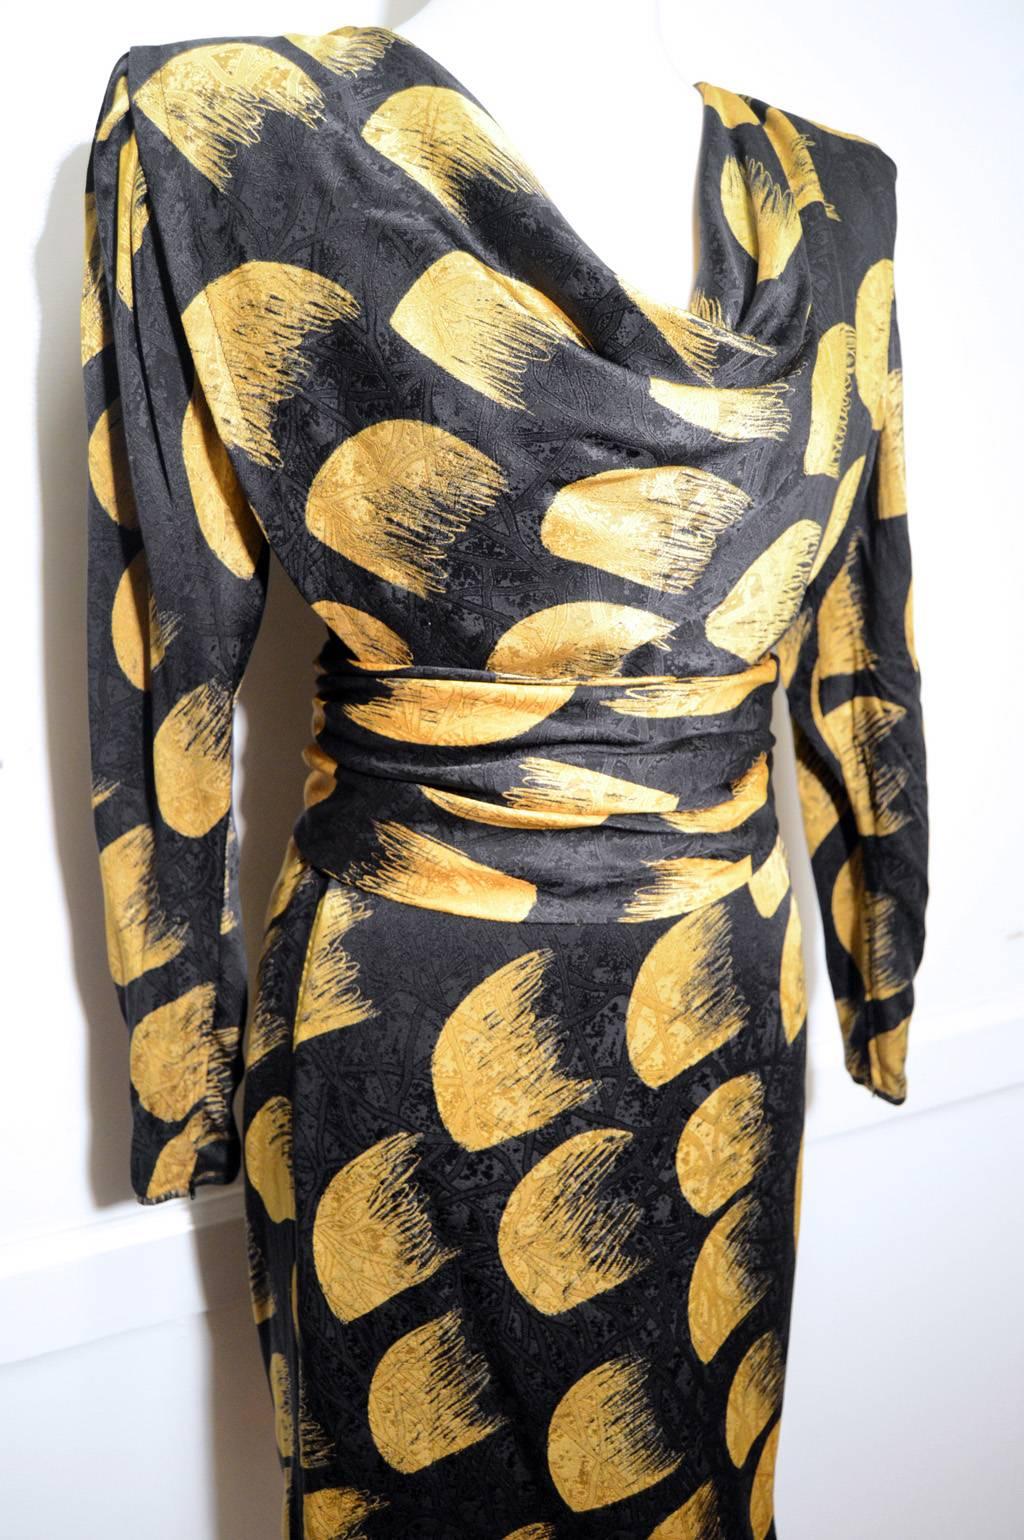 1980s Emanuel Ungaro Parallele Paris silk dress.  Black silk with unique yellow brush stroke style print.  matching ruched buttoned belt included.  Wide shoulder design with Front triangle panel that can be worn lose or tucked into belt. Tagged size